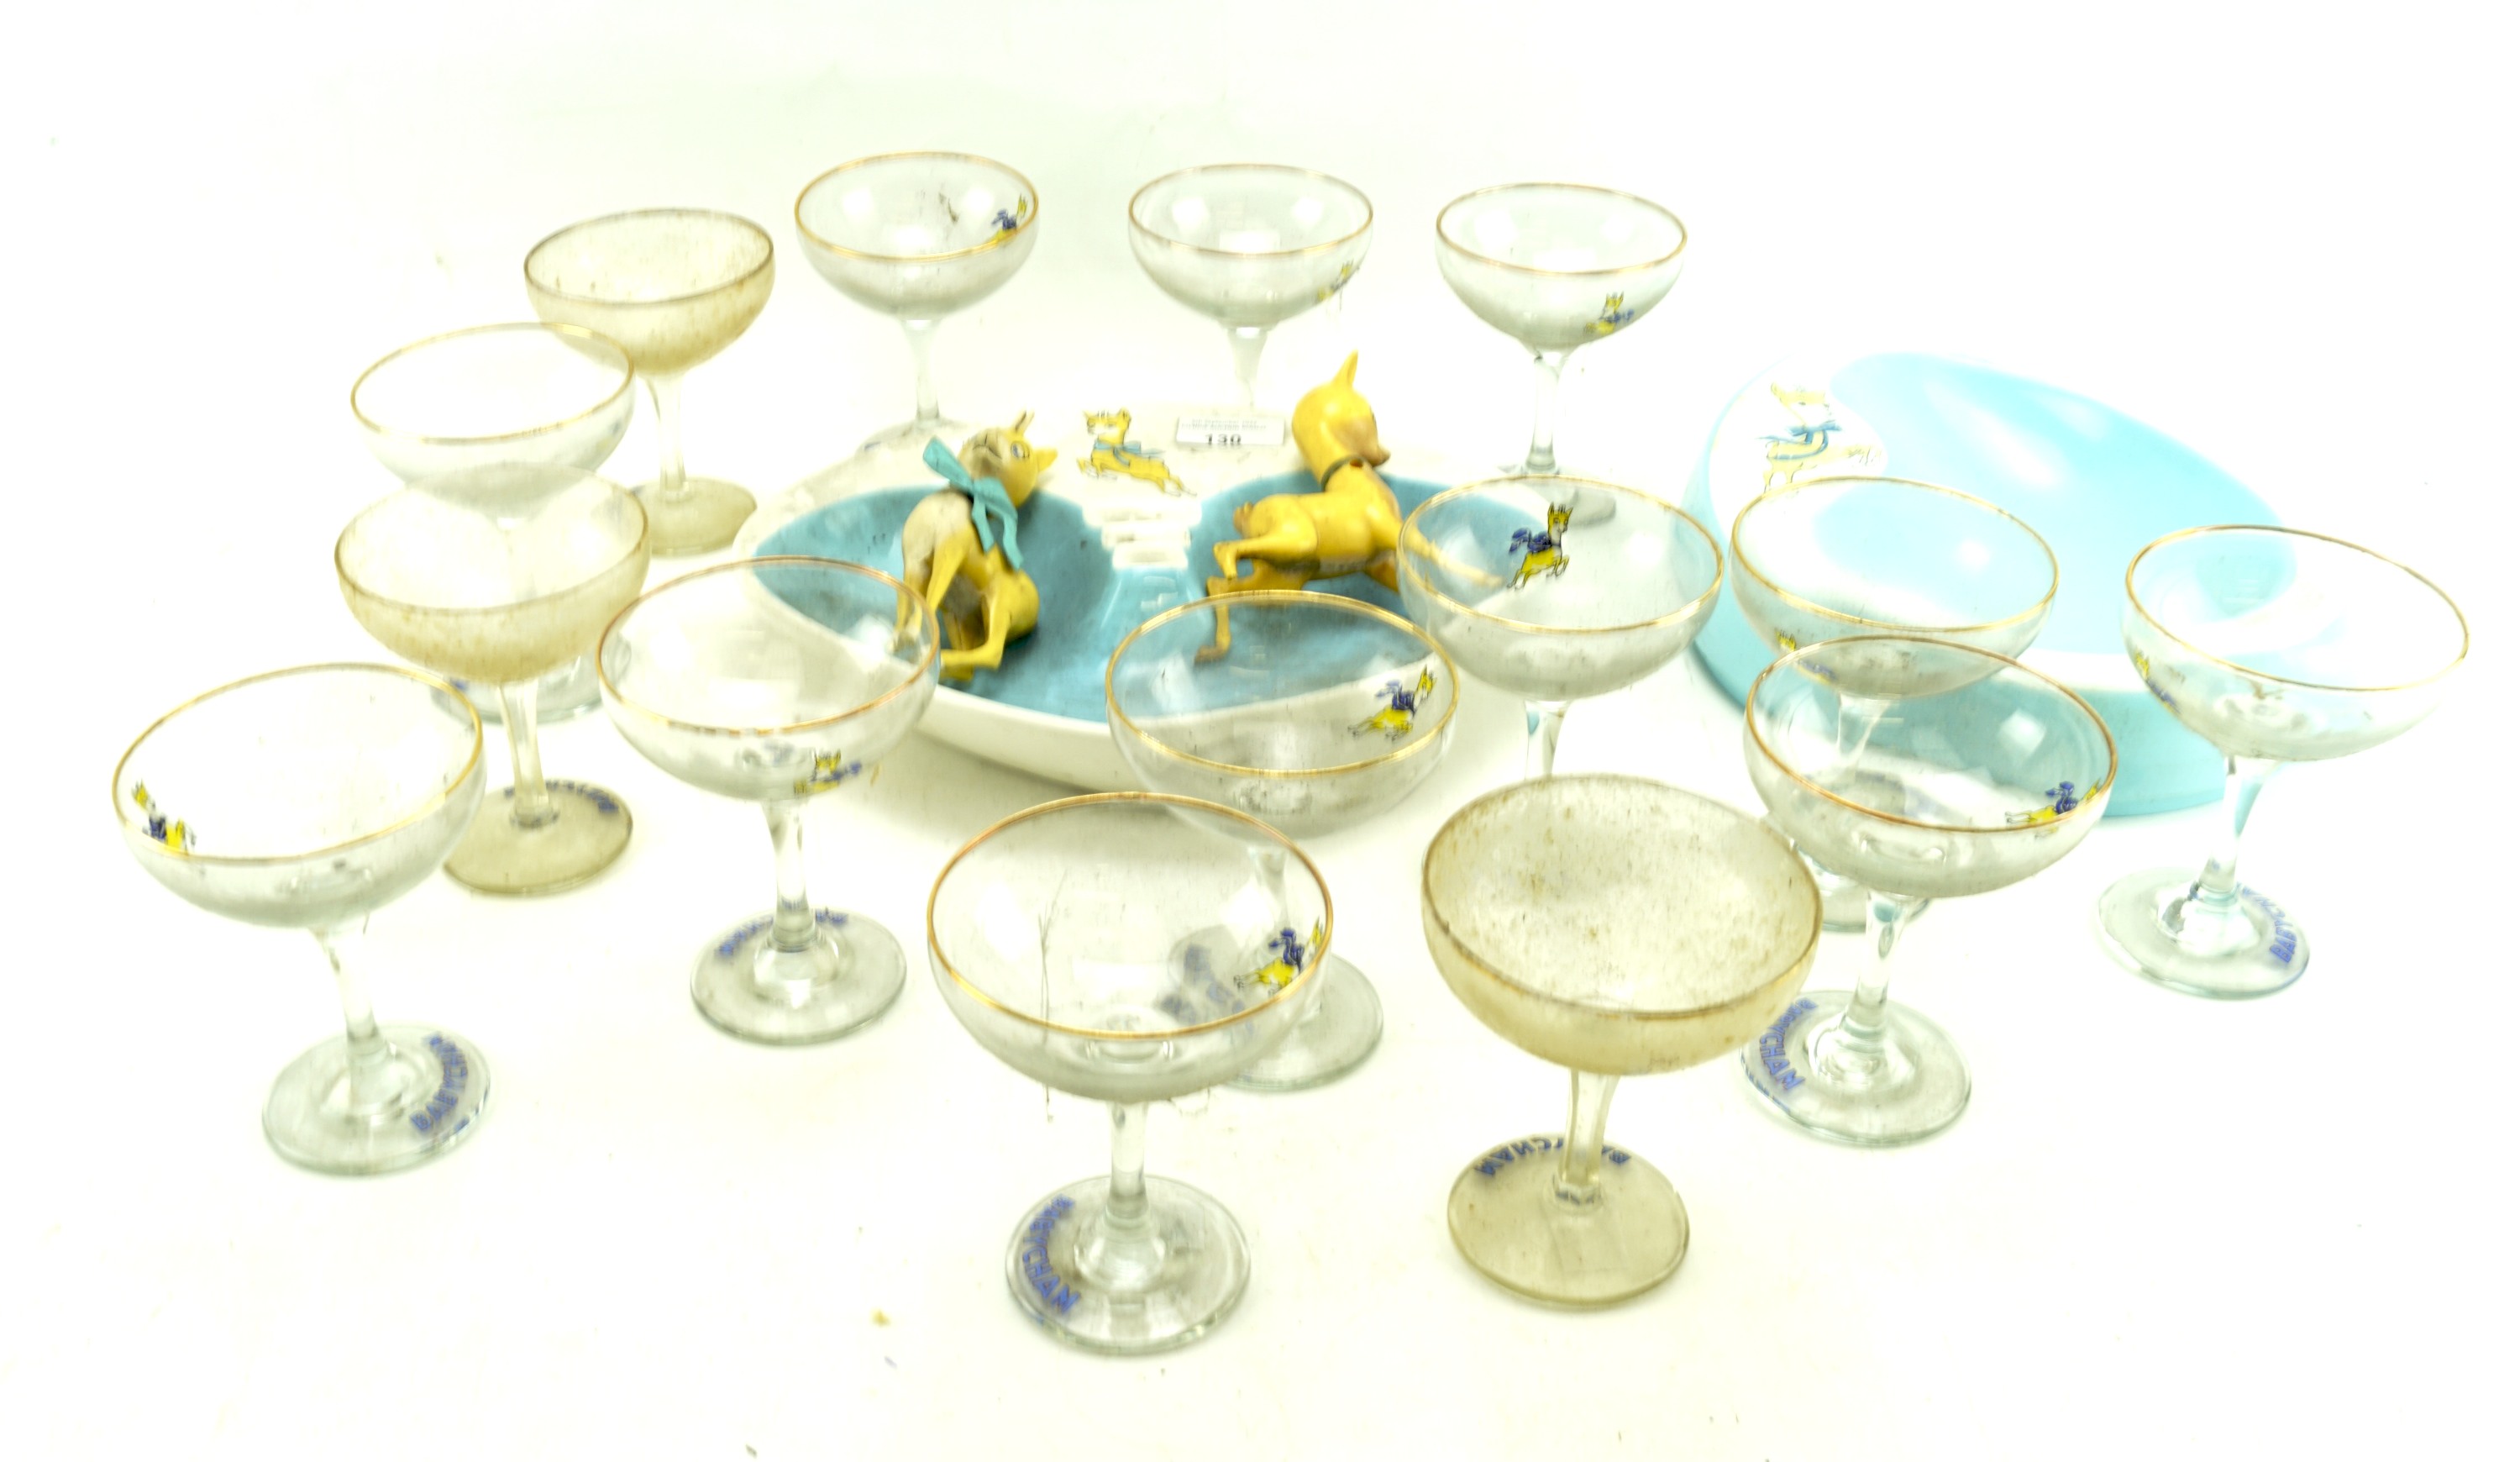 Fifteen Babycham glasses and two ashtrays.